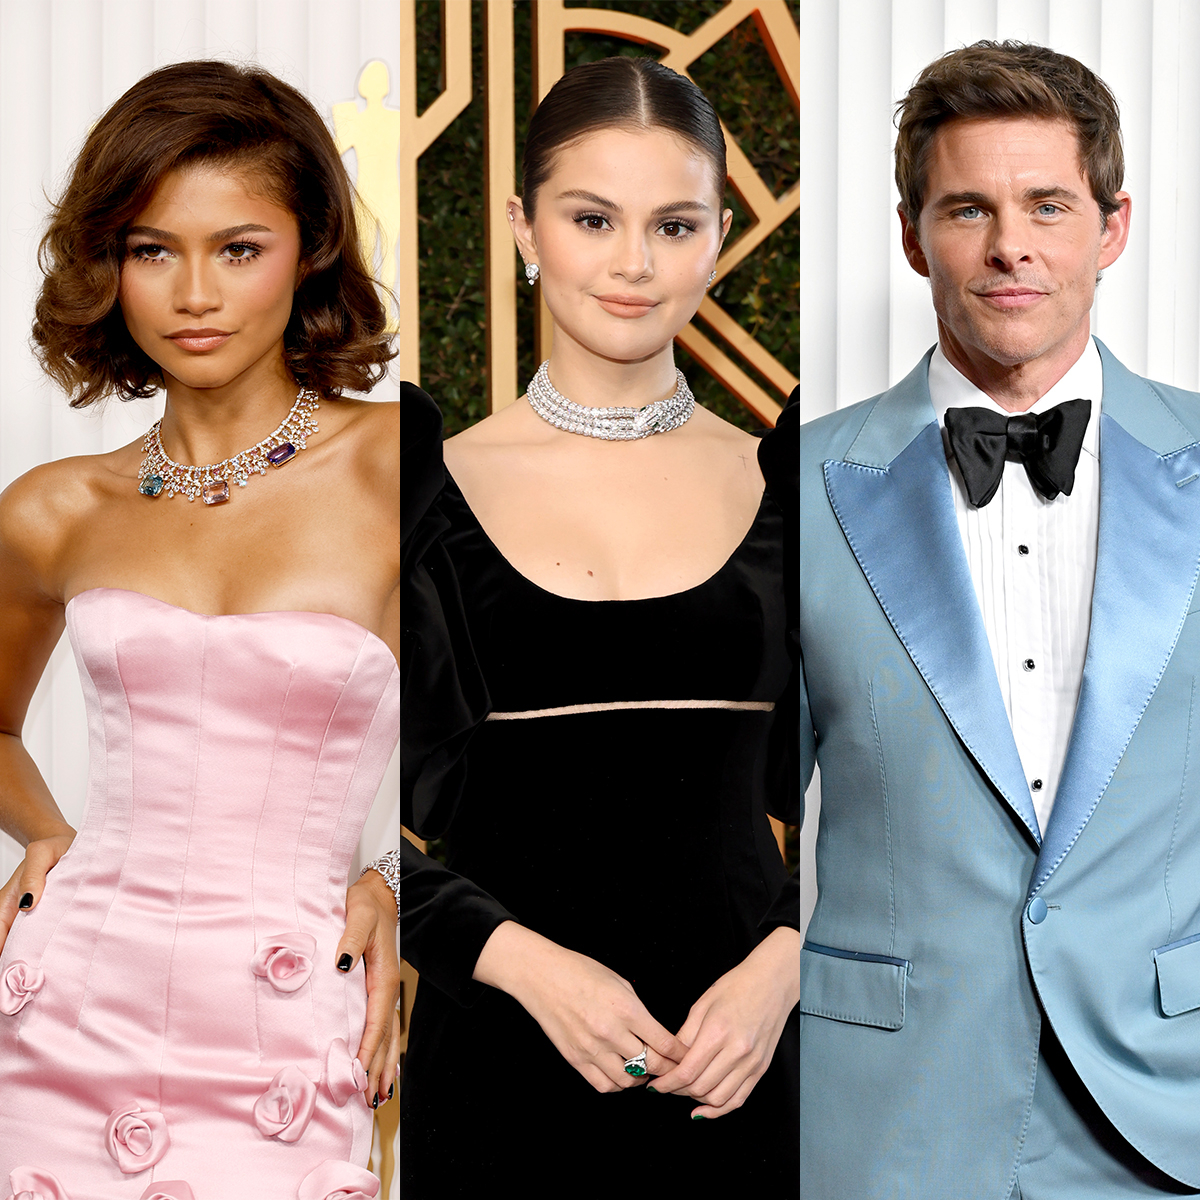 Give It Up For the Best SAG Award Red Carpet Fashion Looks of All Time